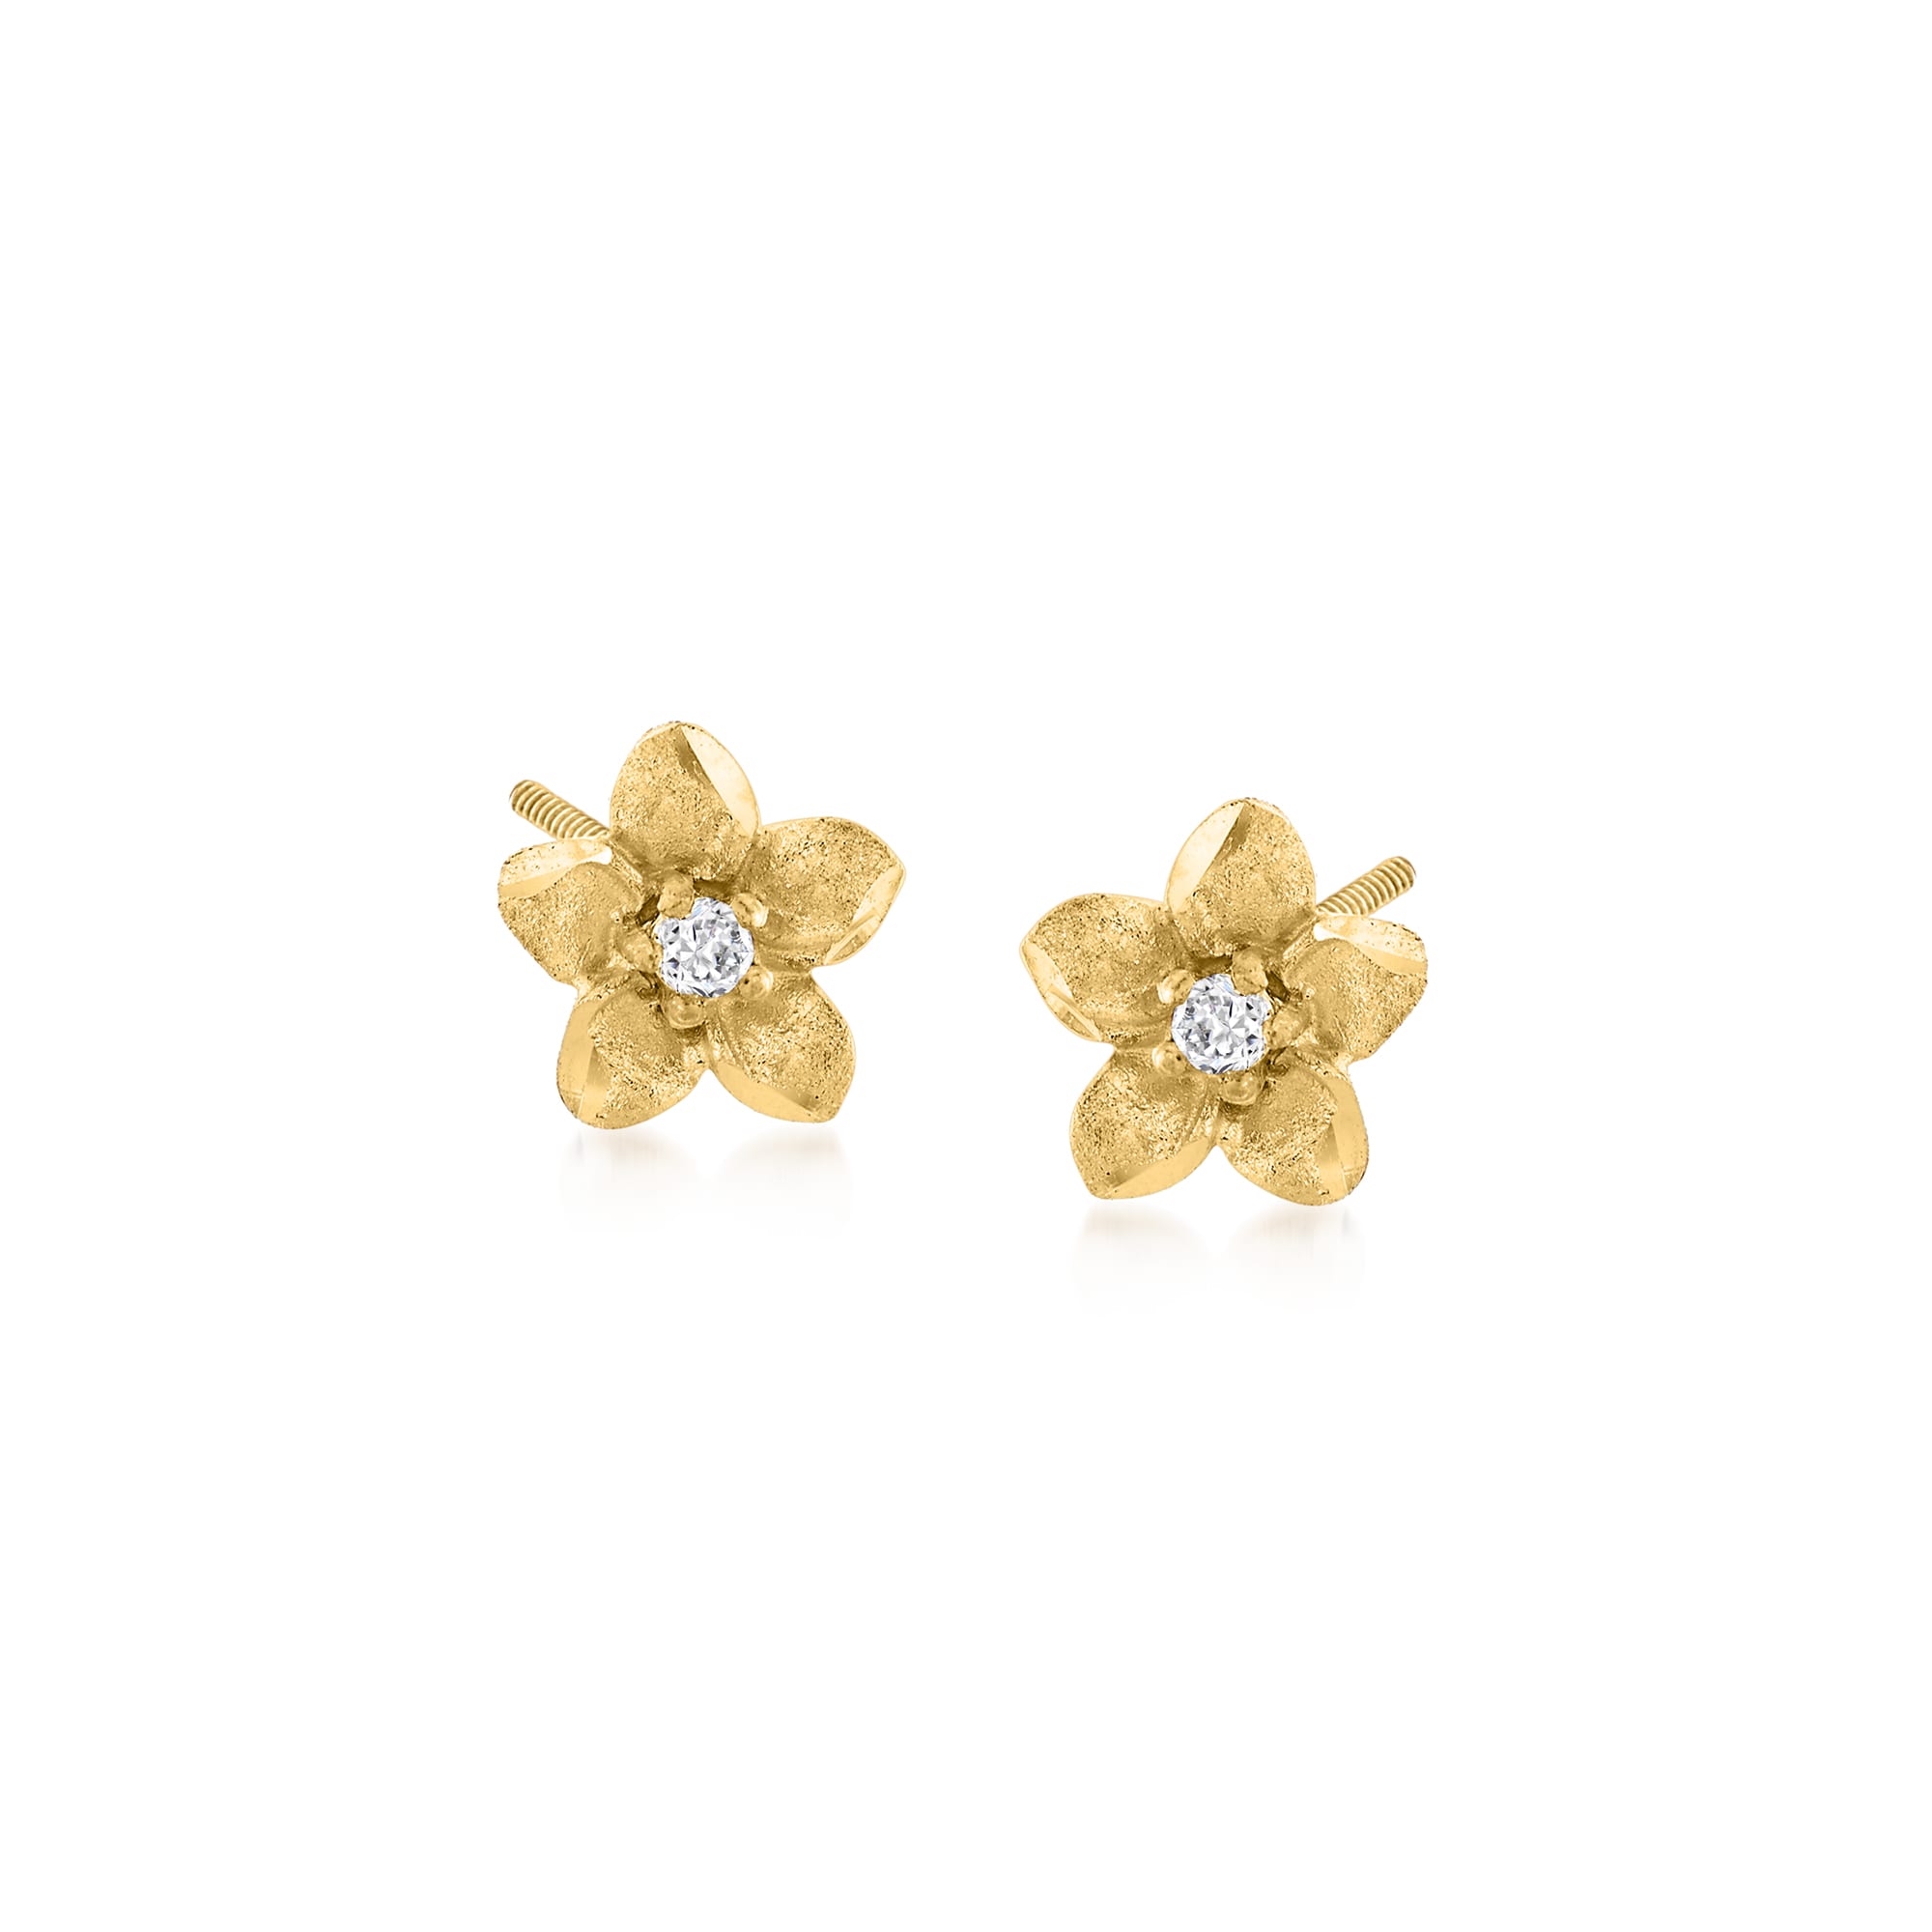 Child's 14kt Yellow Gold Flower Stud Earrings with Diamond Accents ...